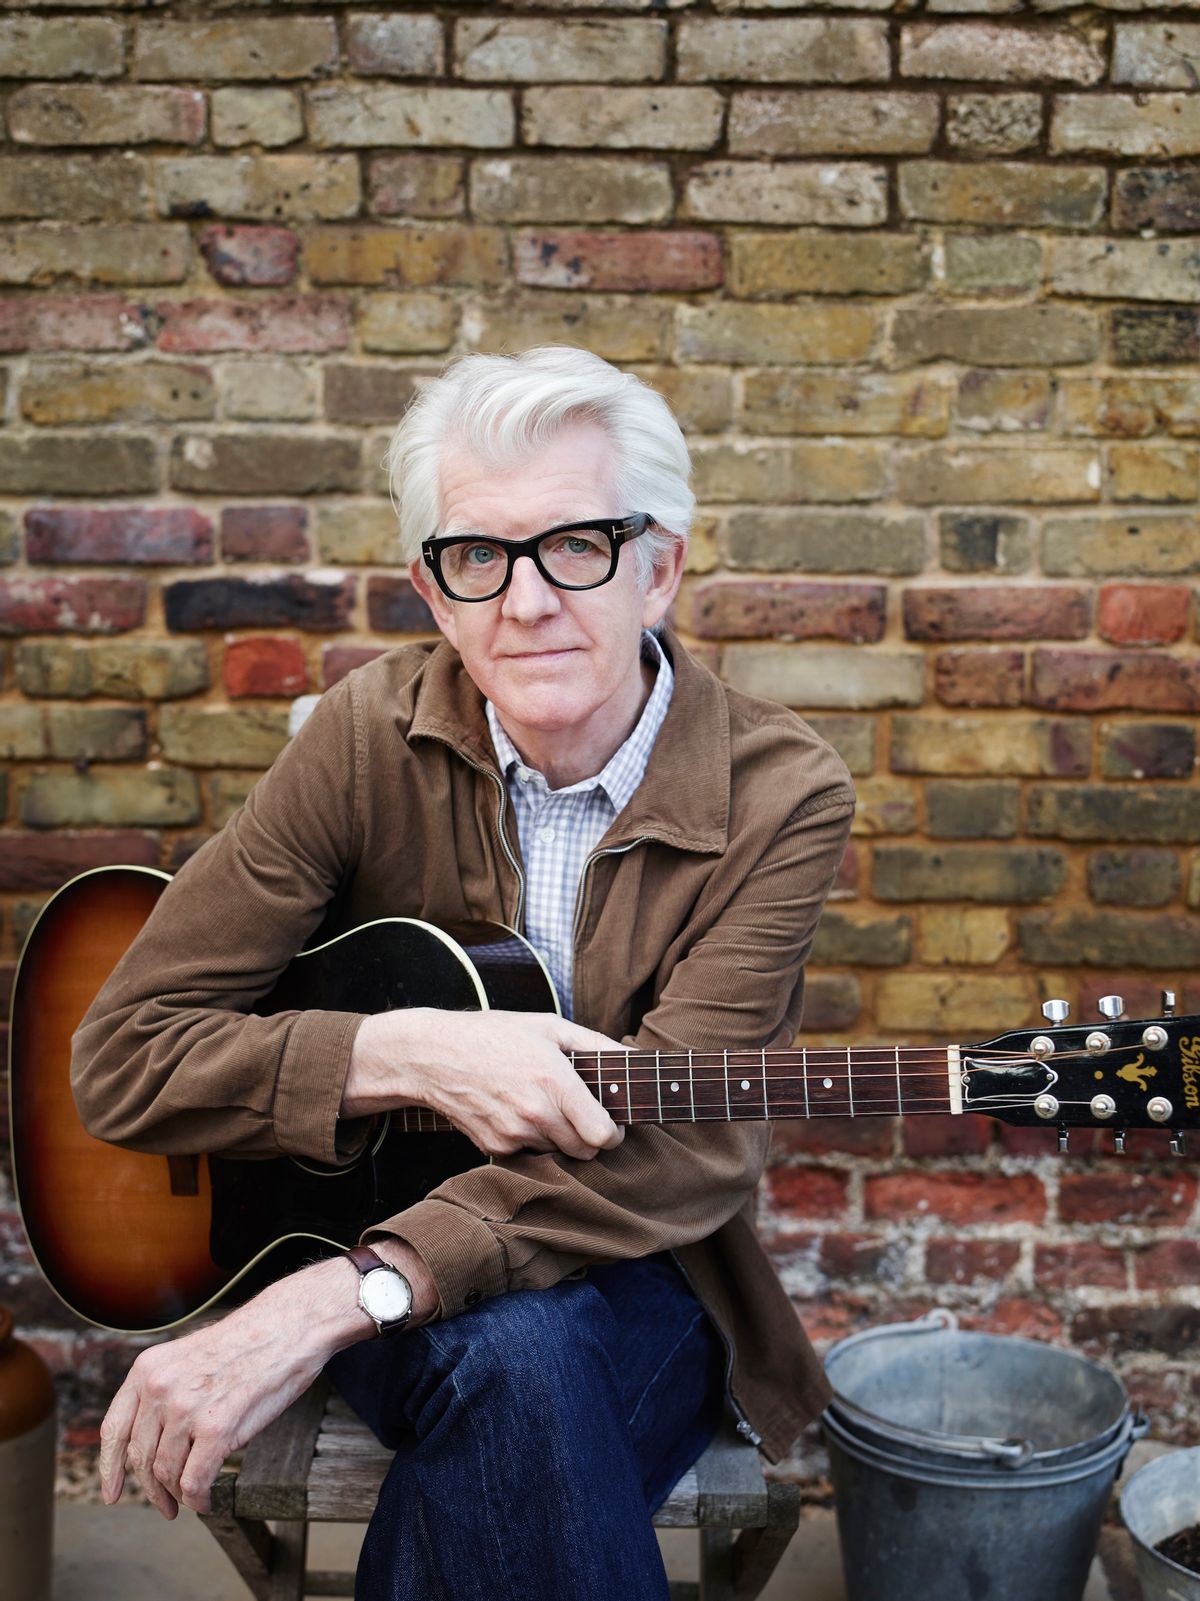 Nick Lowe poses with an acoustic guitar.